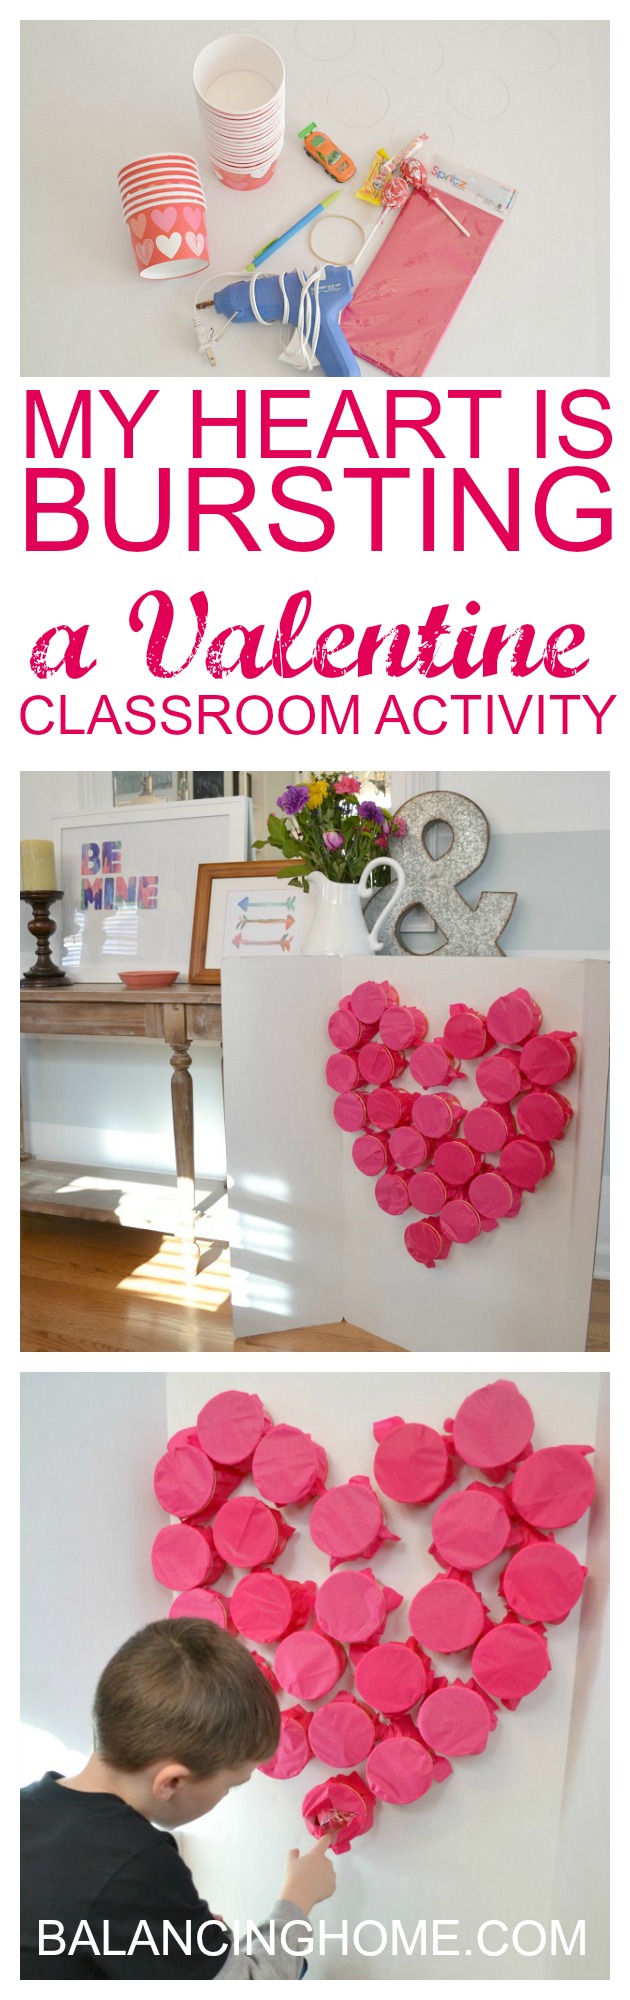 MY-HEART-IS-BURSTING-A-VALENTINE-CLASSROOM-ACTIVITY-COLLAGE